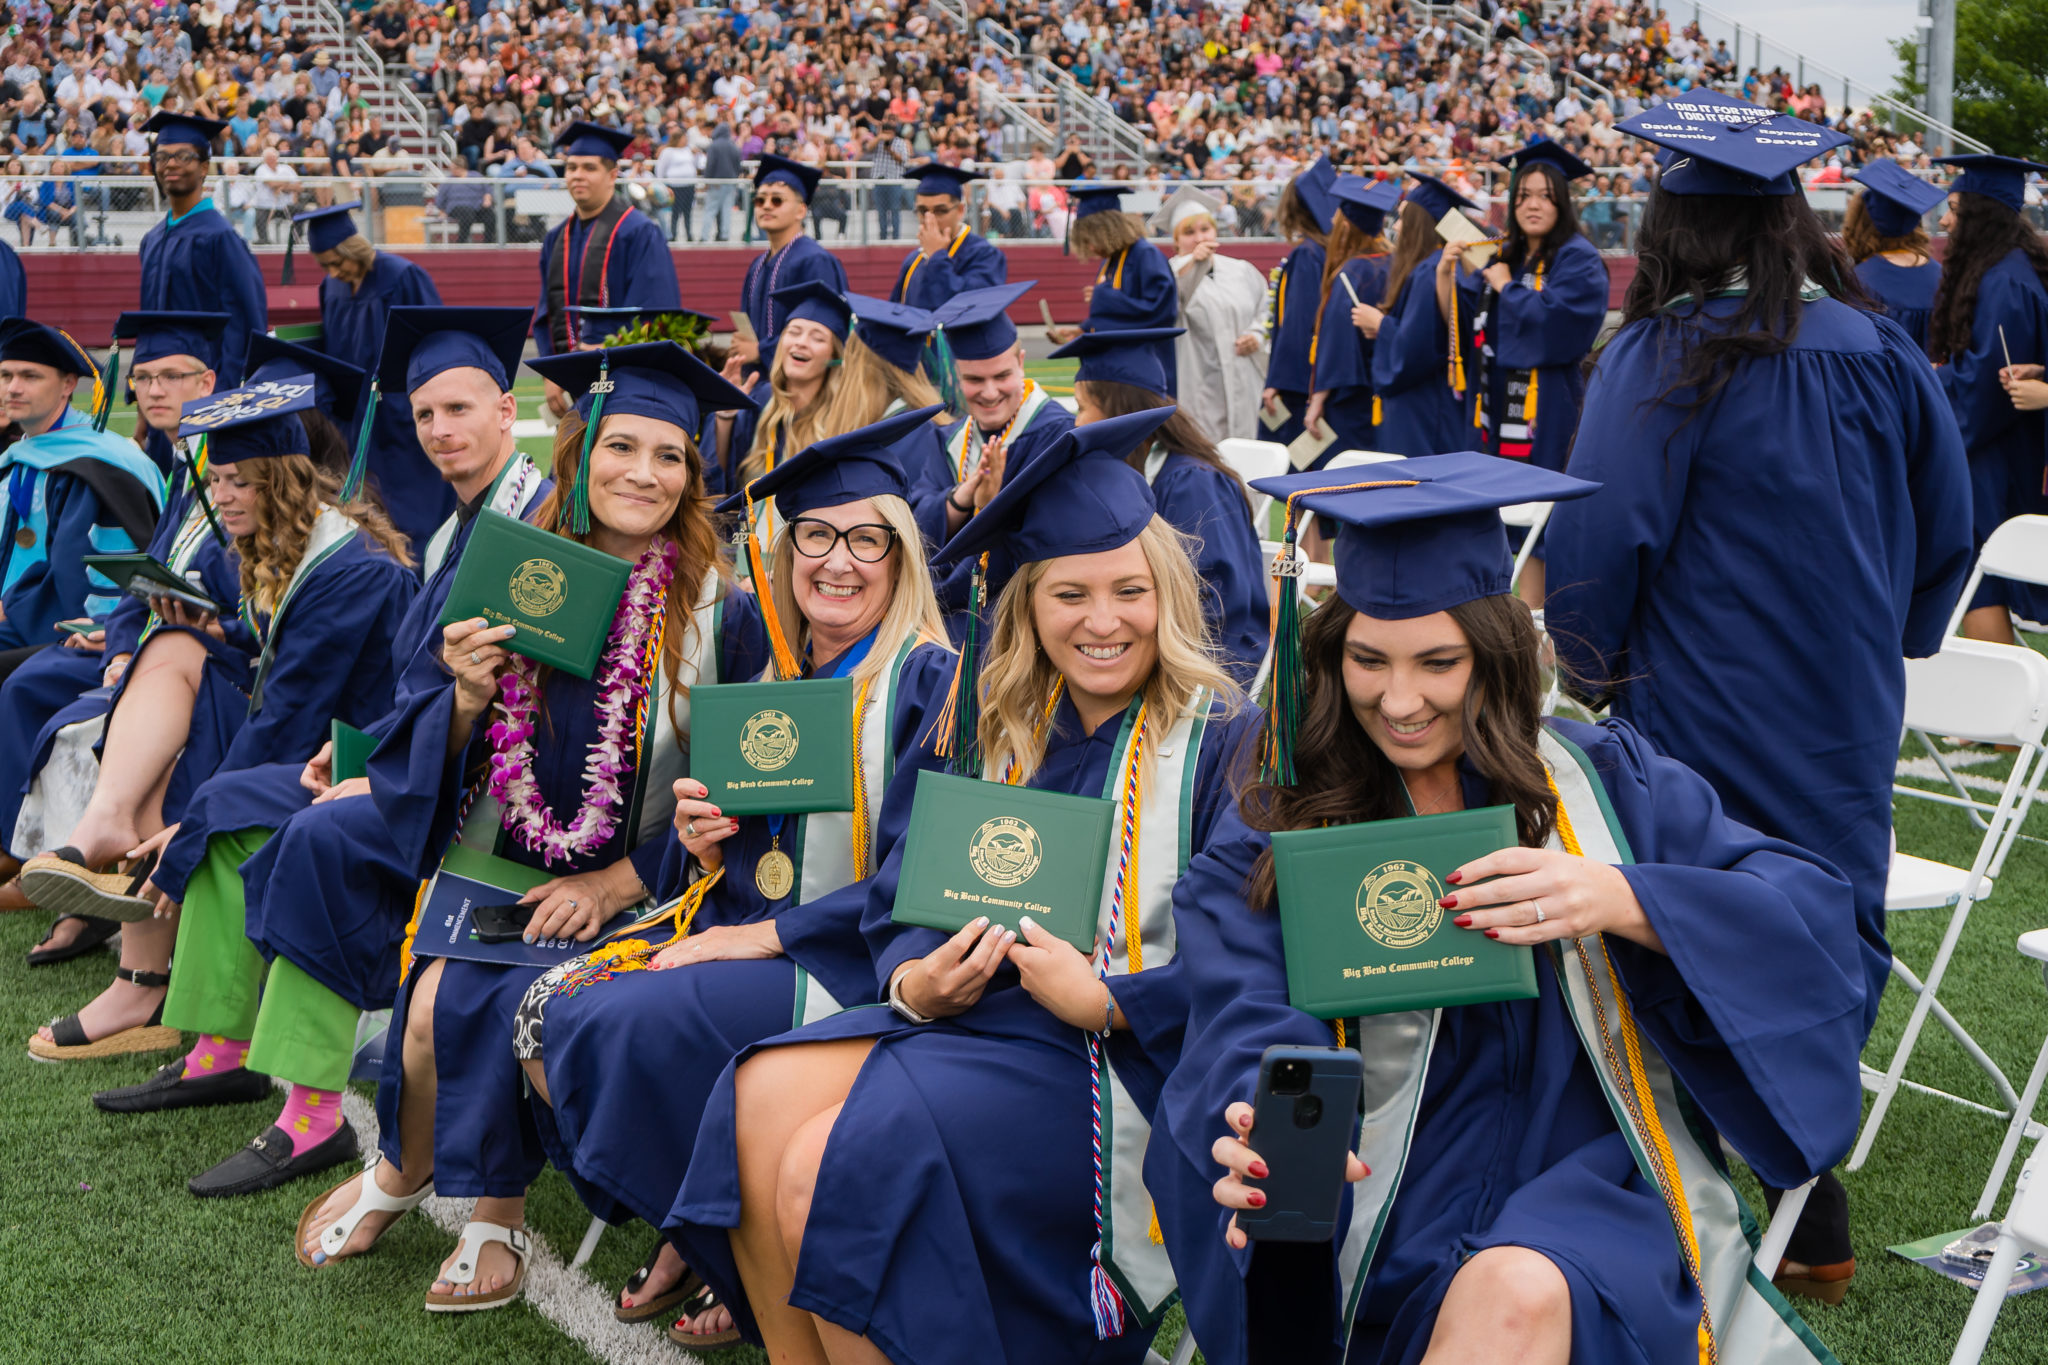 Members of the first cohort of Big Bend’s Bachelor of Applied Science in Applied Management degree program take a selfie after receiving their diplomas.